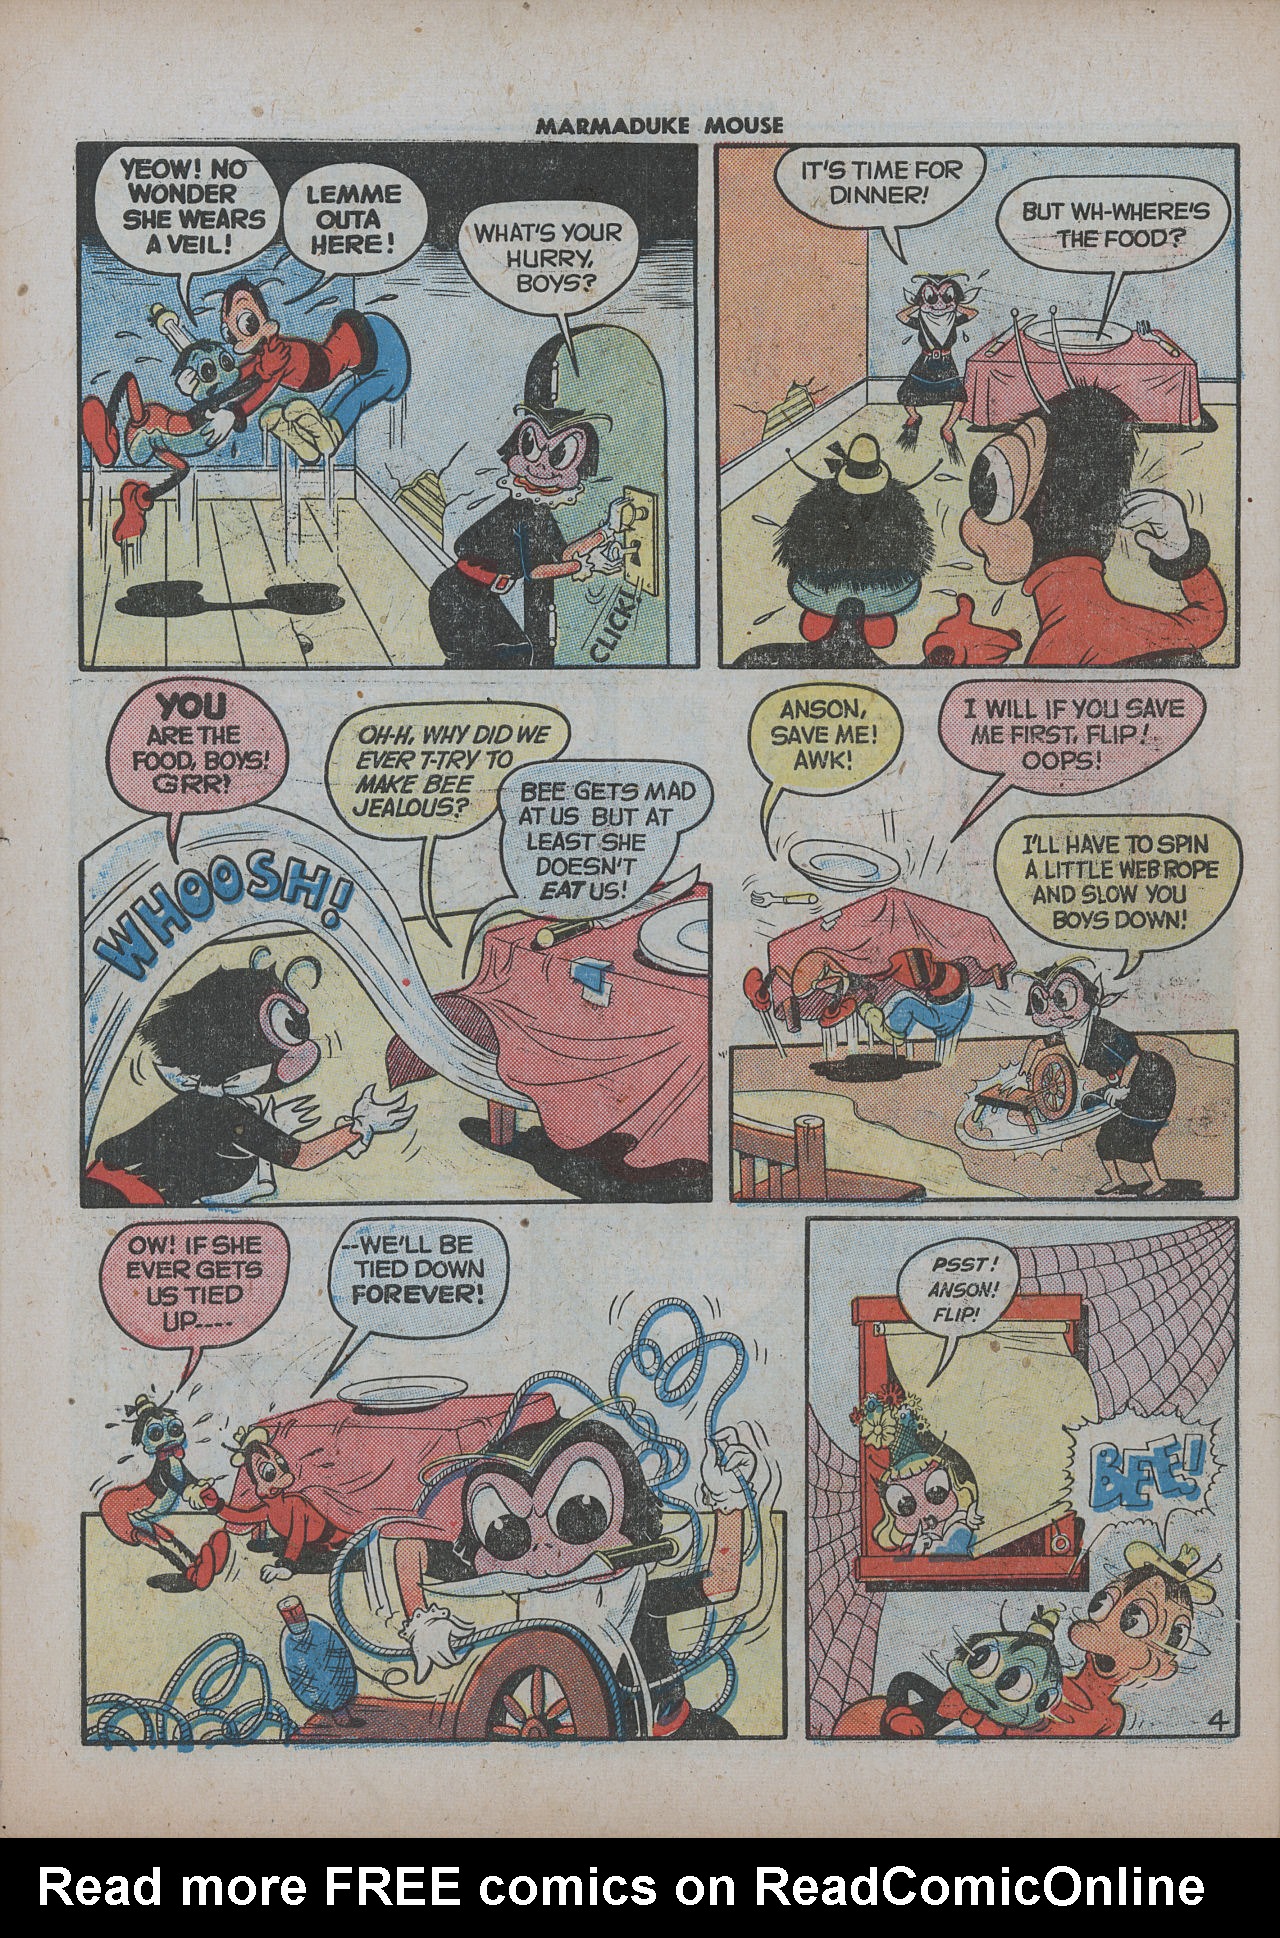 Read online Marmaduke Mouse comic -  Issue #3 - 42